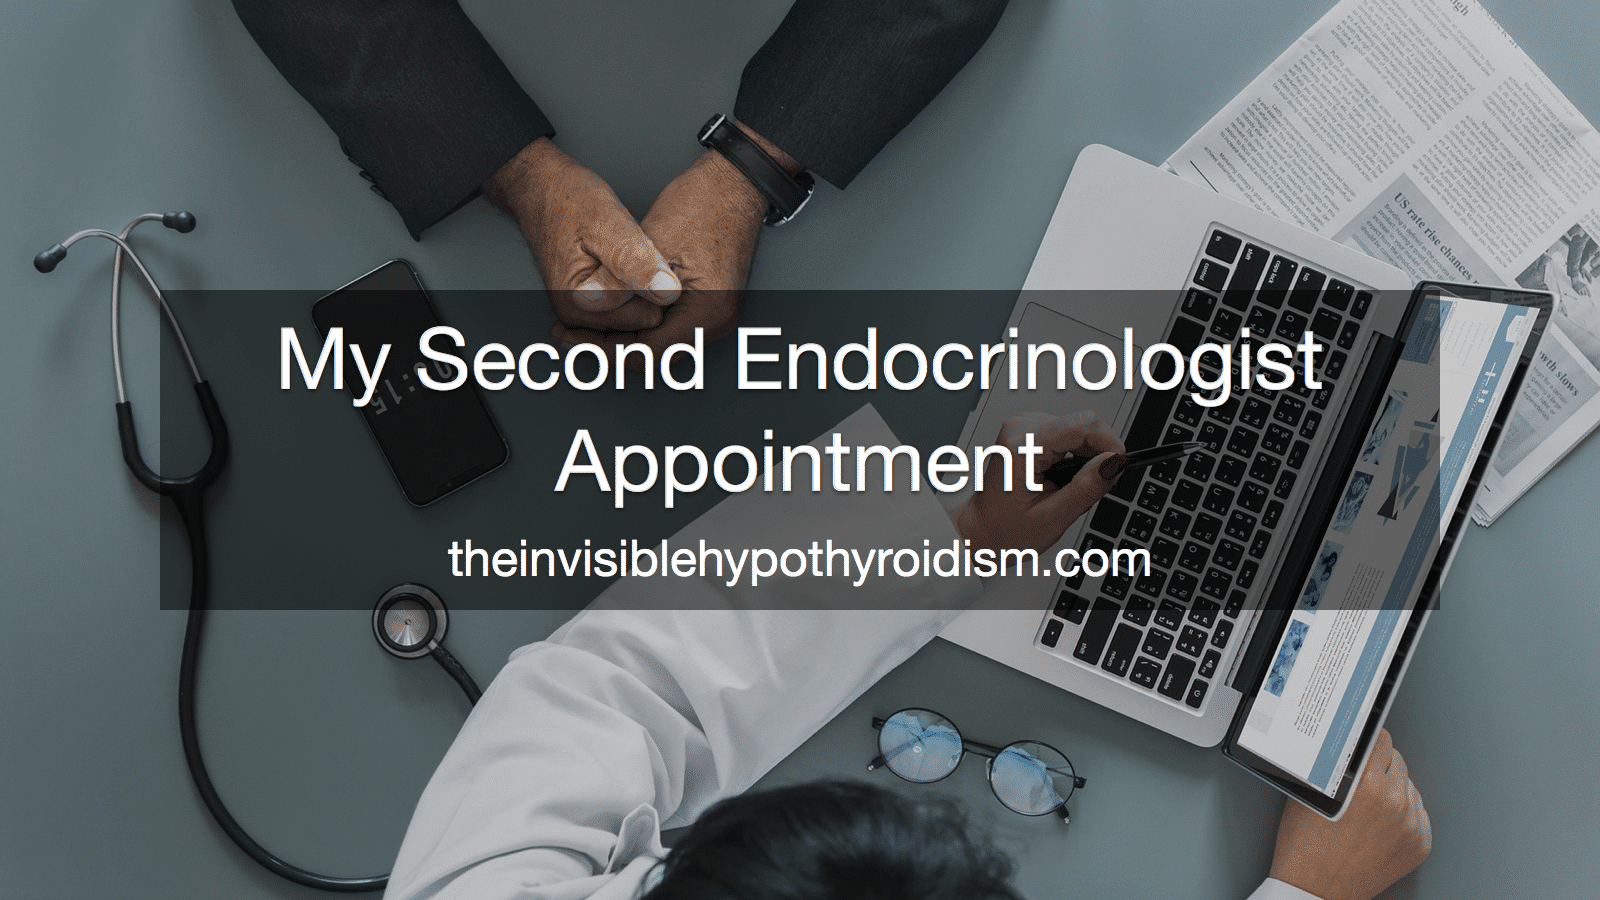 My Second Endocrinologist Appointment